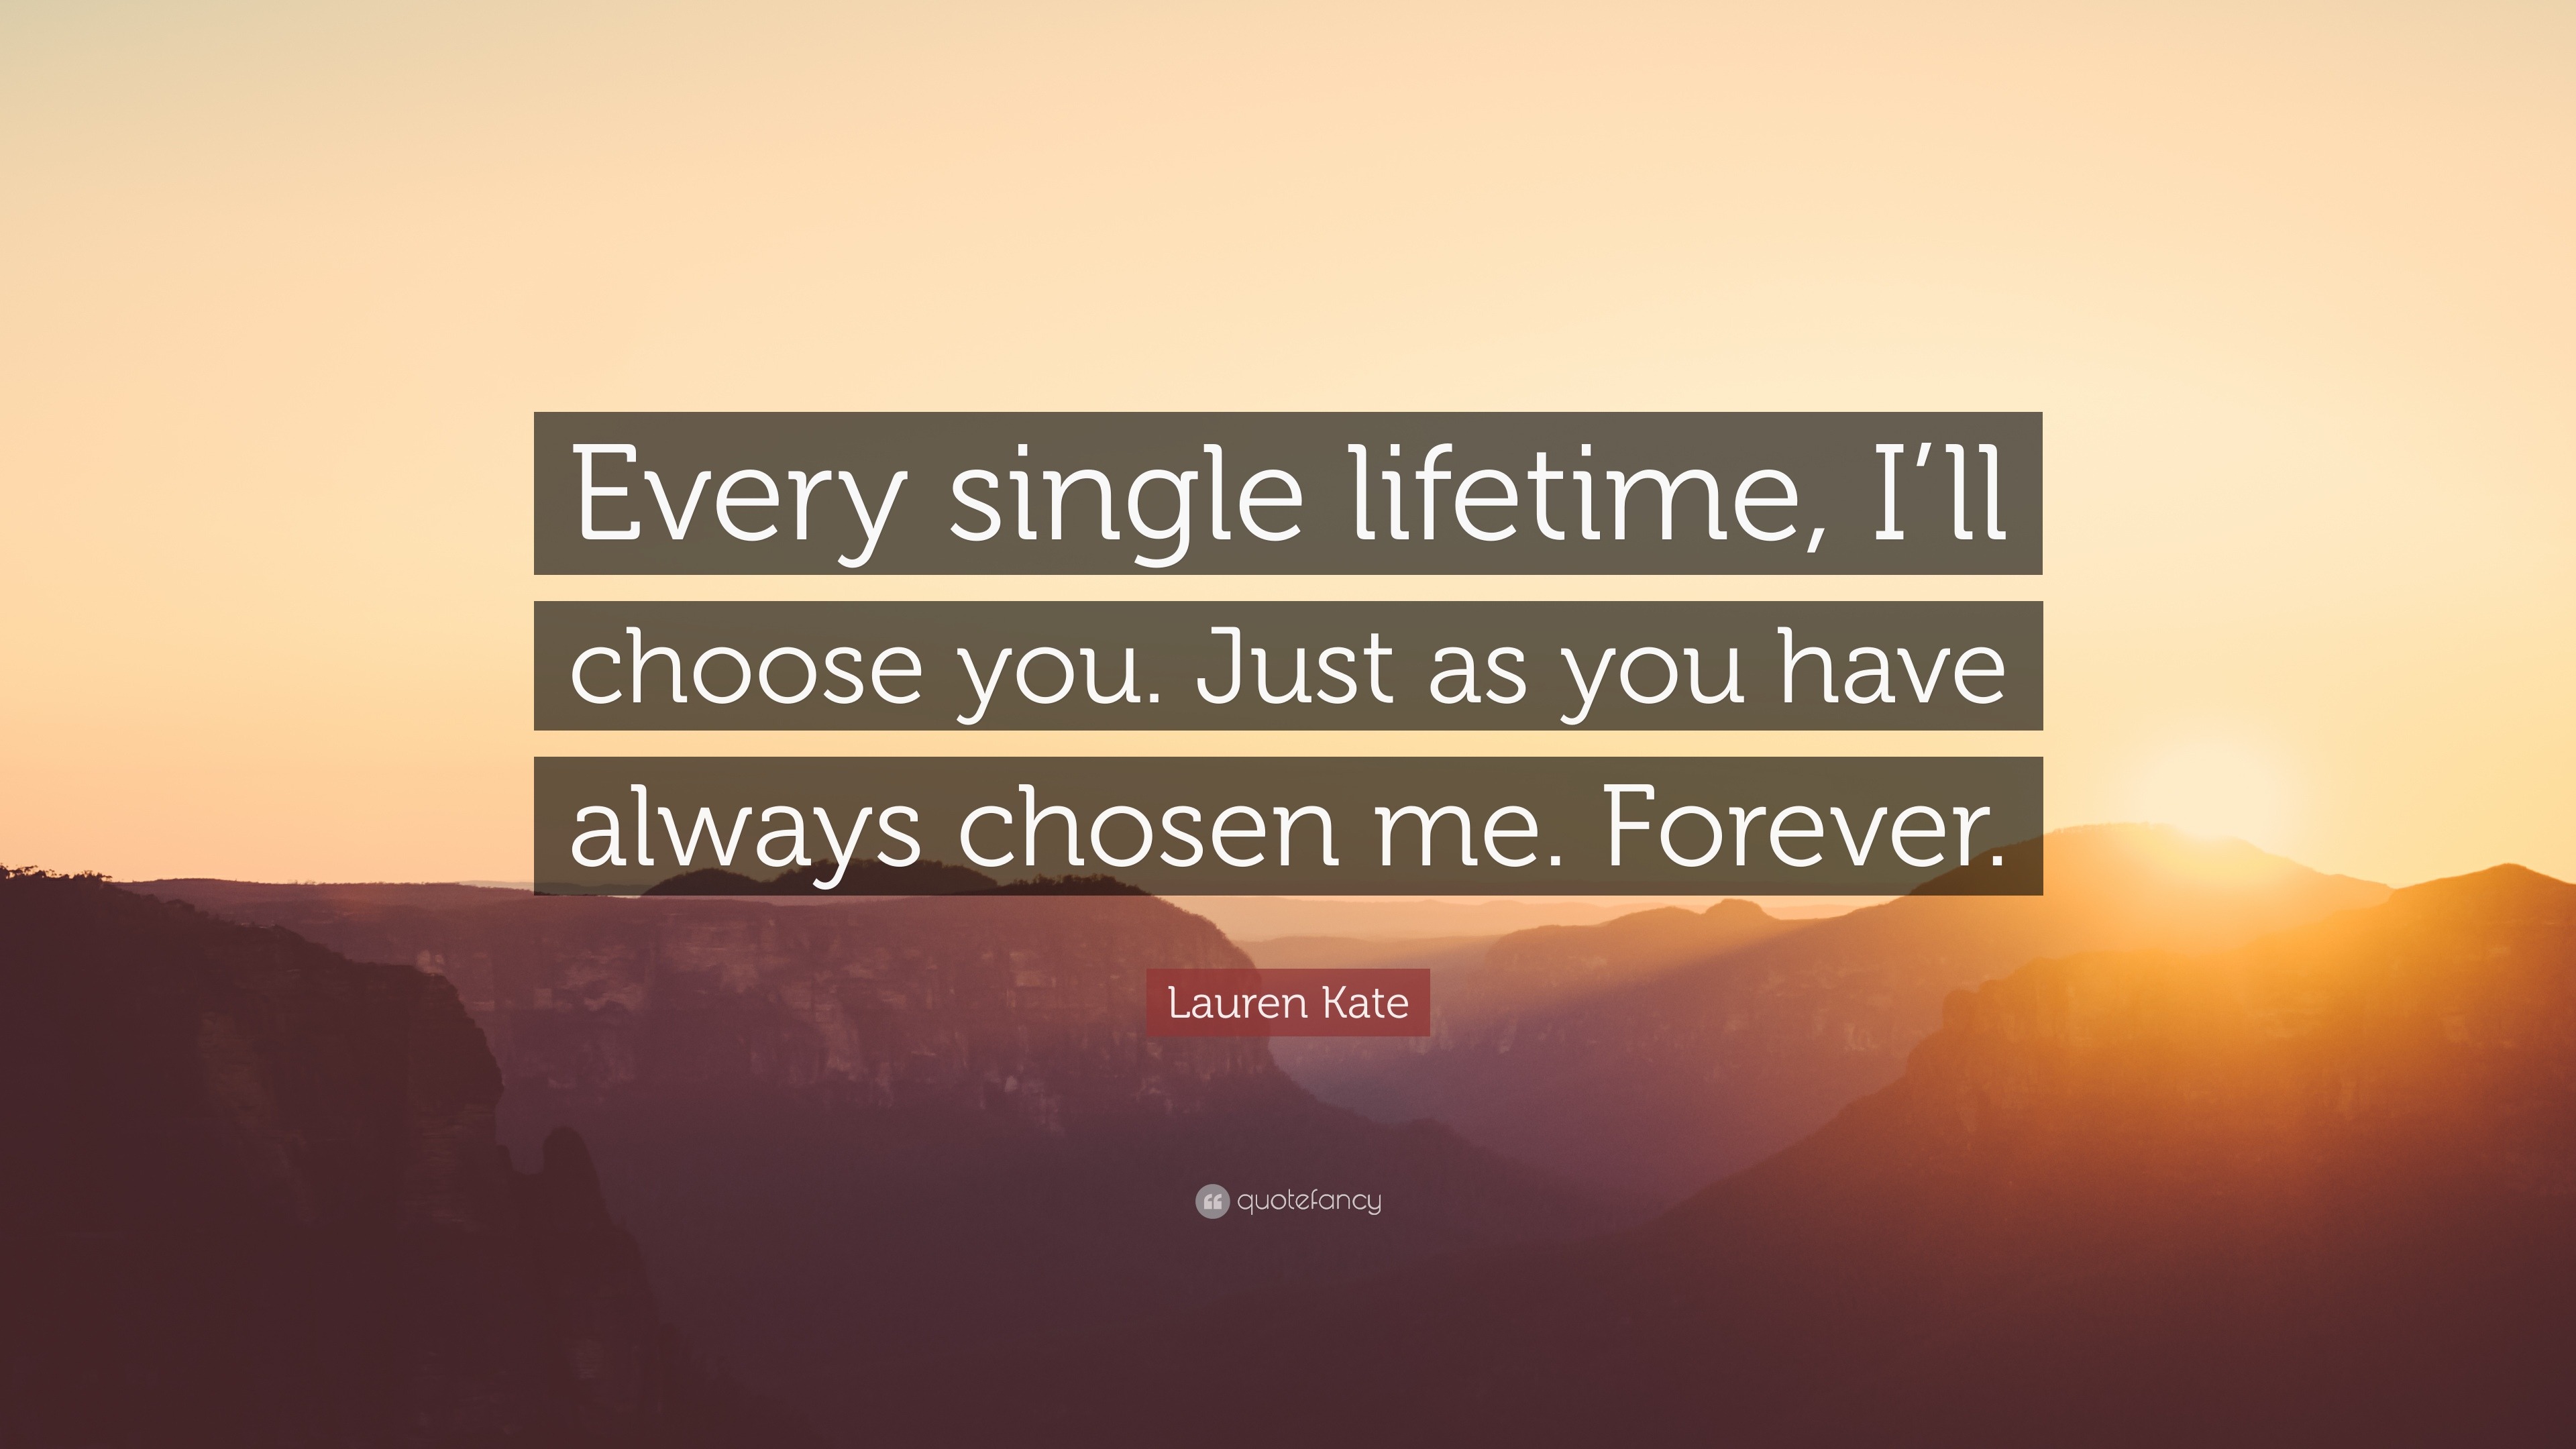 Lauren Kate Quote: “Every single lifetime, I’ll choose you. Just as you ...